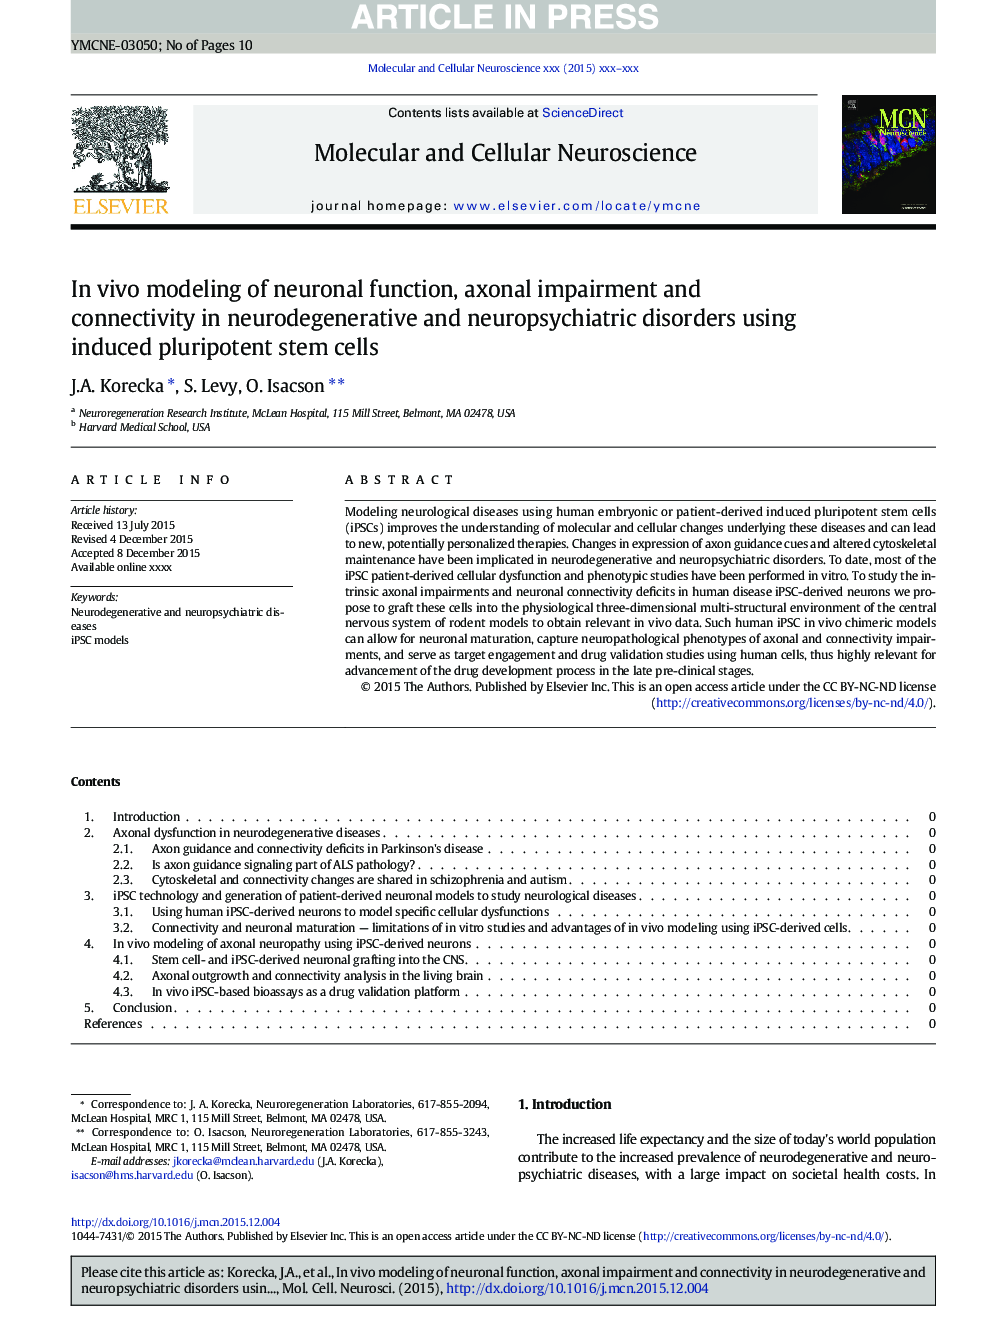 In vivo modeling of neuronal function, axonal impairment and connectivity in neurodegenerative and neuropsychiatric disorders using induced pluripotent stem cells